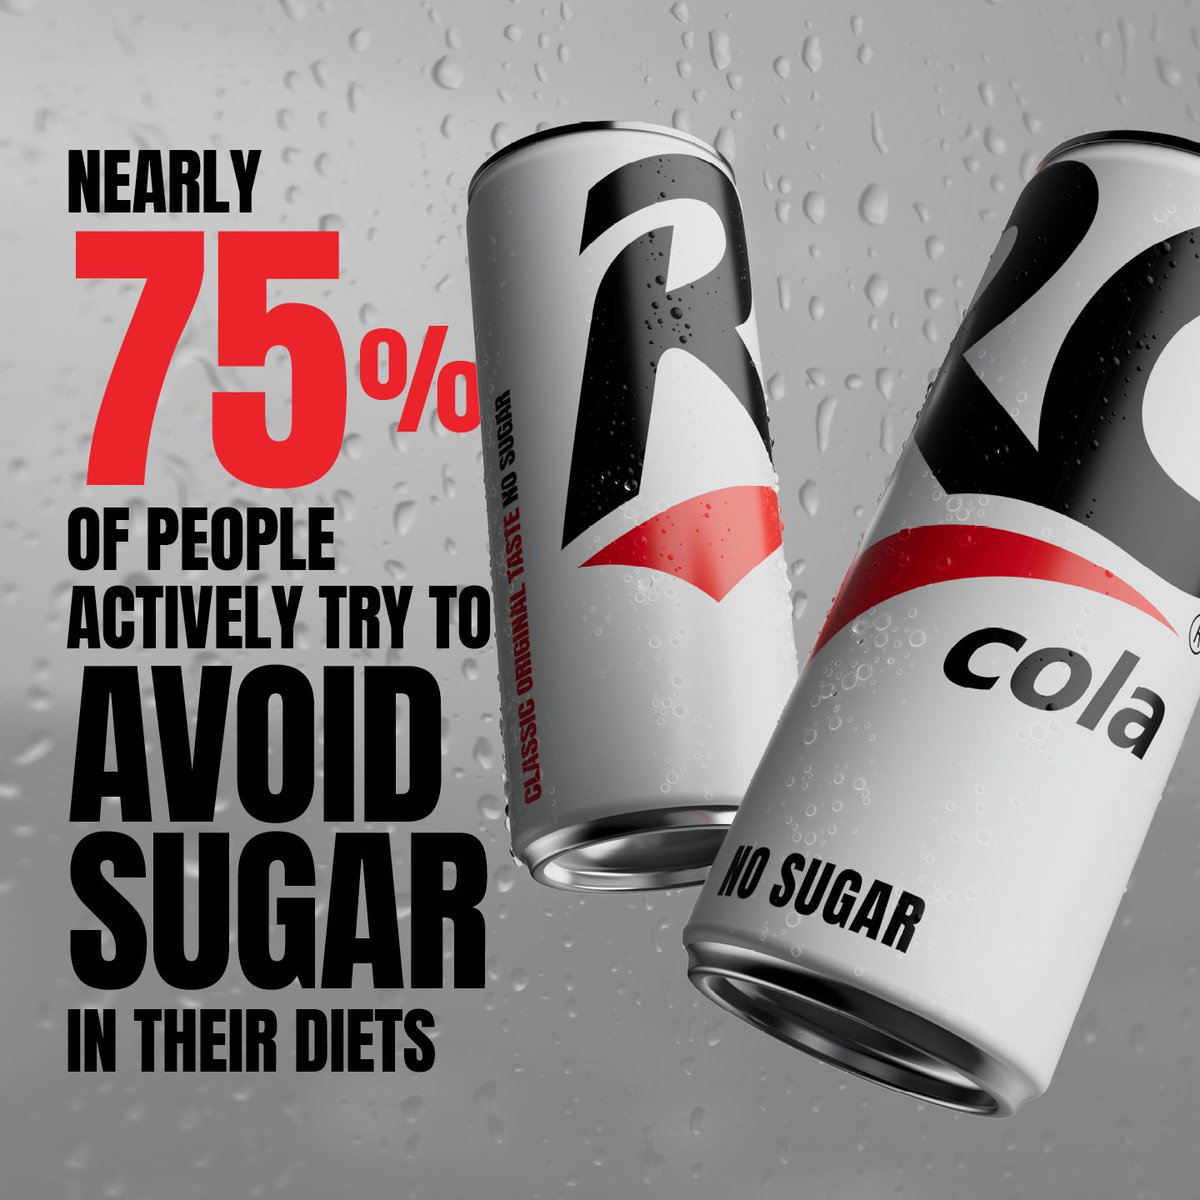 🚫 Say goodbye to sugar & hello to alternative sweeteners! 🍬 Discover how the beverage industry is shifting towards natural alternatives, facing sugar taxes, and exploring exotic flavors. Find out more in here: hubs.ly/Q02vv2p90

#beverageindustry #beveragetrends #rccola